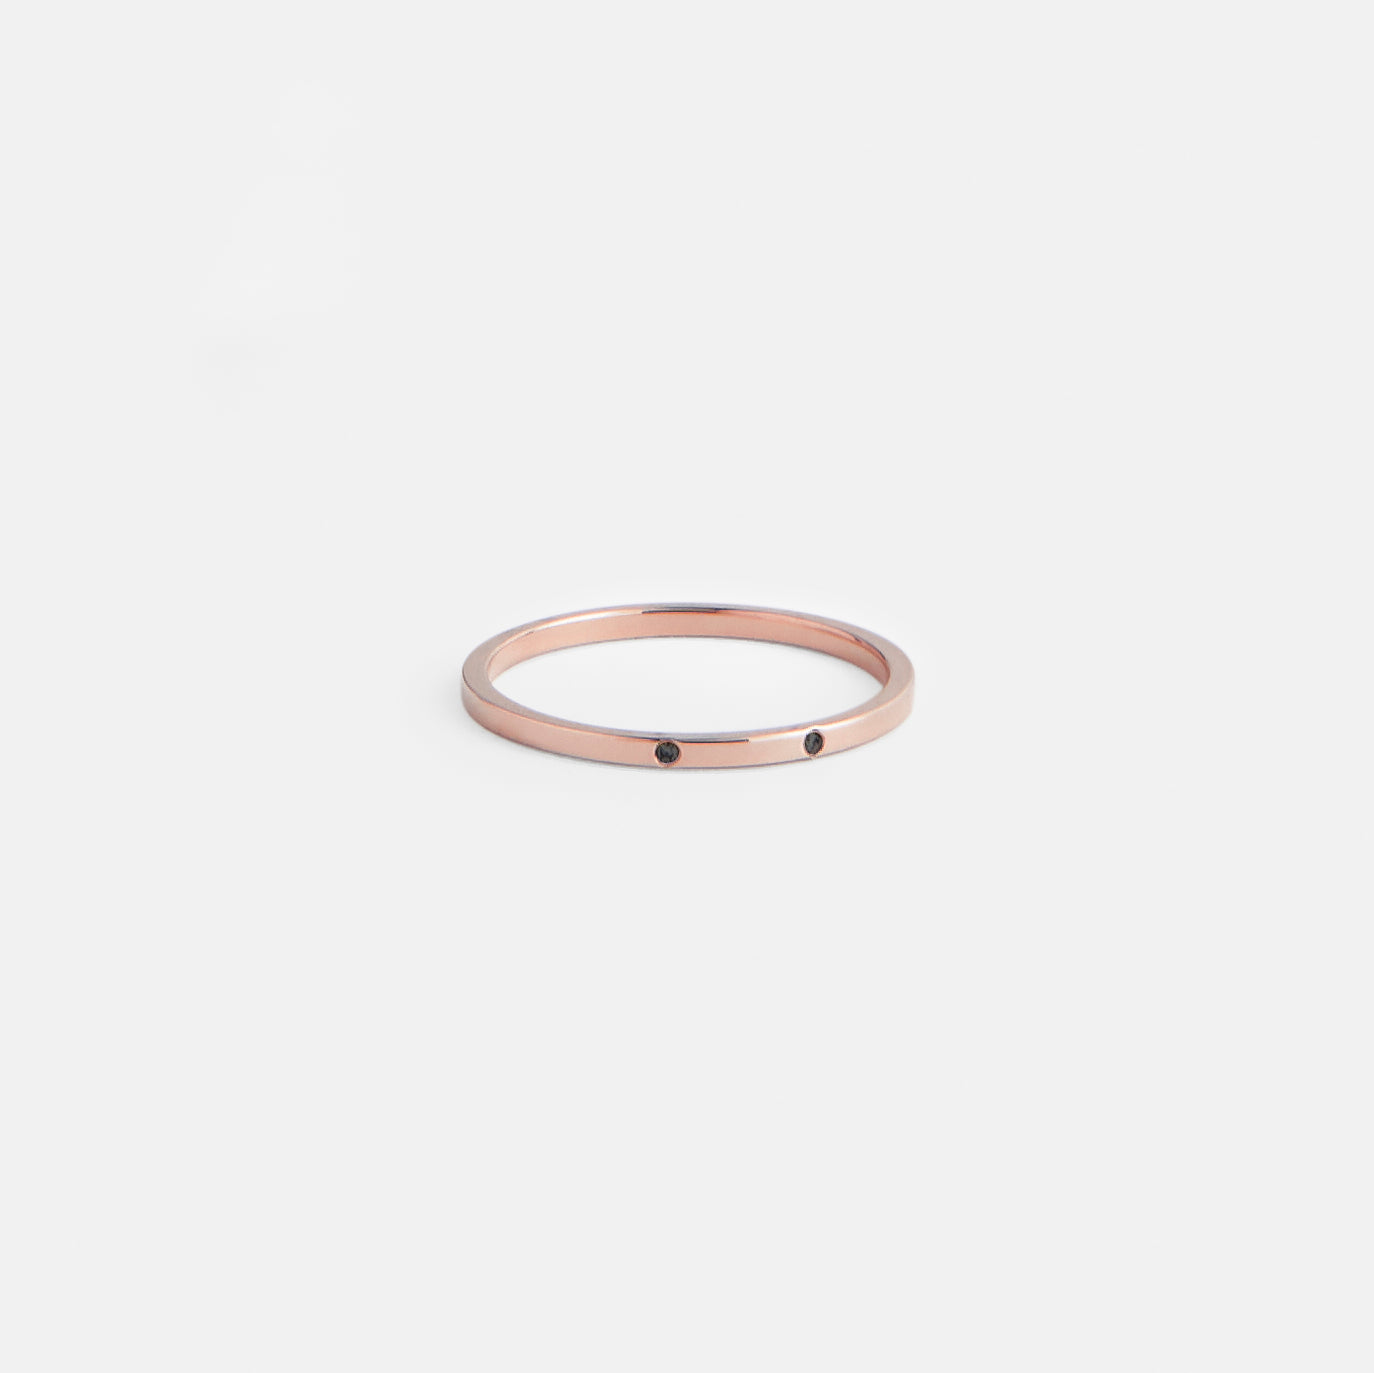 Sarala Alternative Ring in 14k Rose Gold set with Black Diamonds By SHW Fine Jewelry NYC